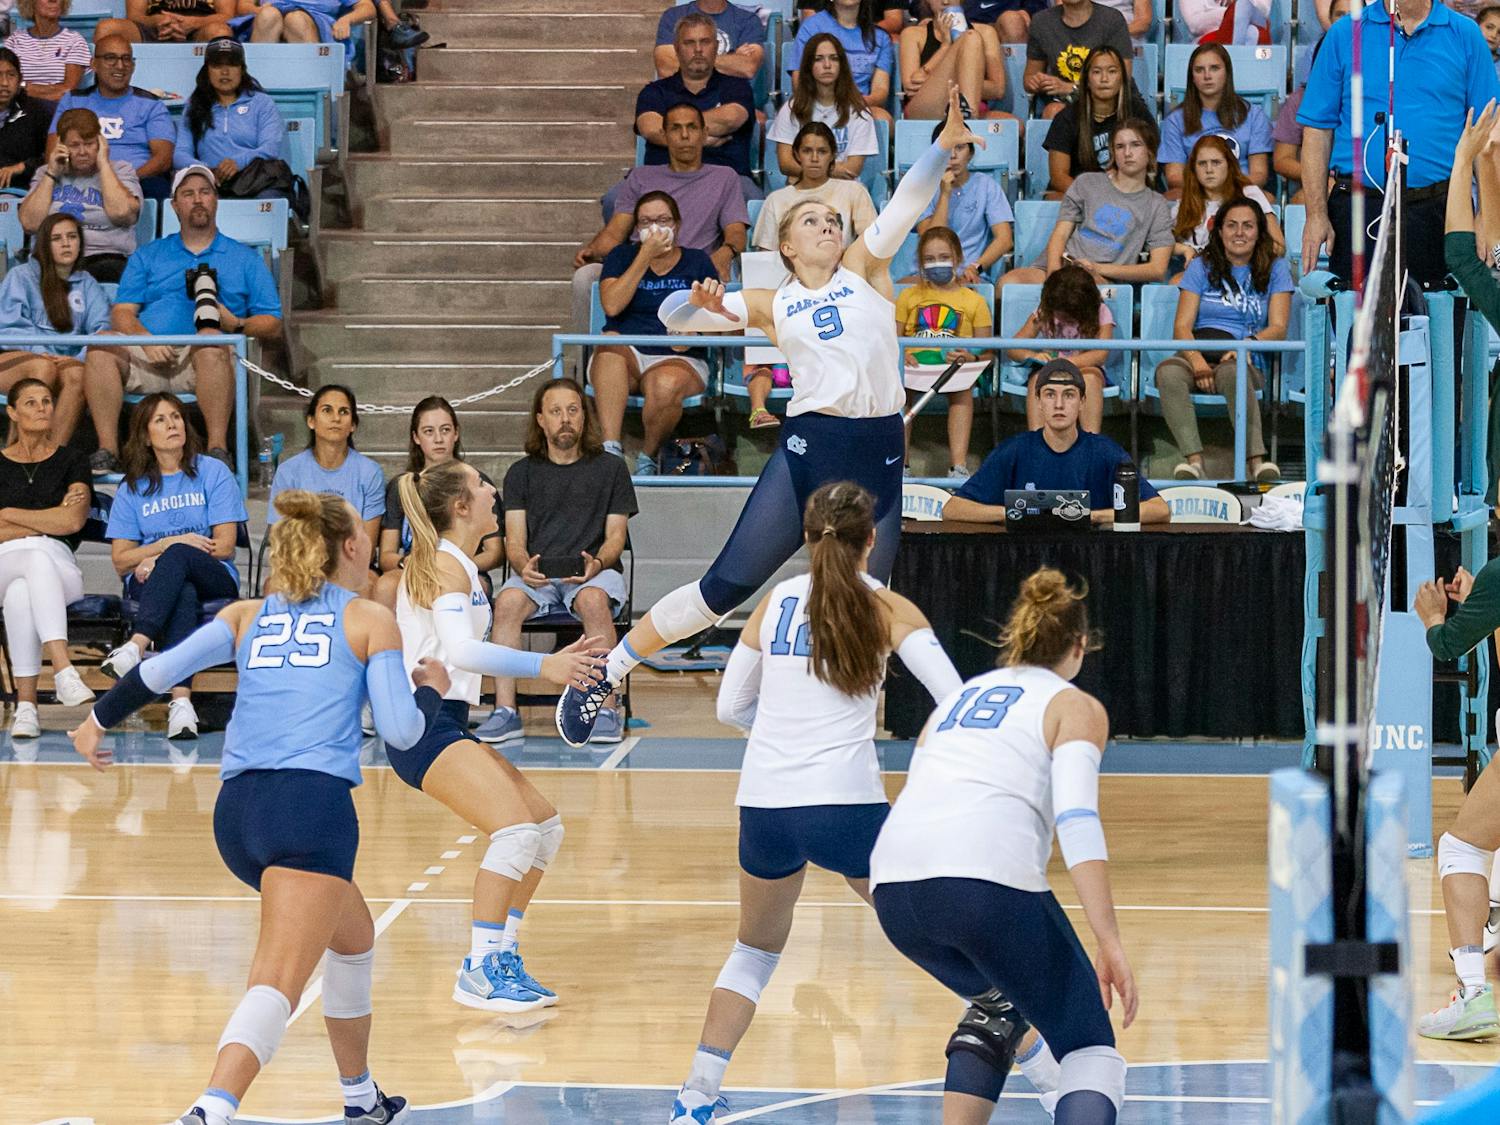 UNC sophomore outside hitter Mabrey Shaffmaster (9) hits the ball during the volleyball match against Michigan State on Friday, Sept. 9, 2022, at Carmichael Arena.  UNC beat Michigan State 3-0.